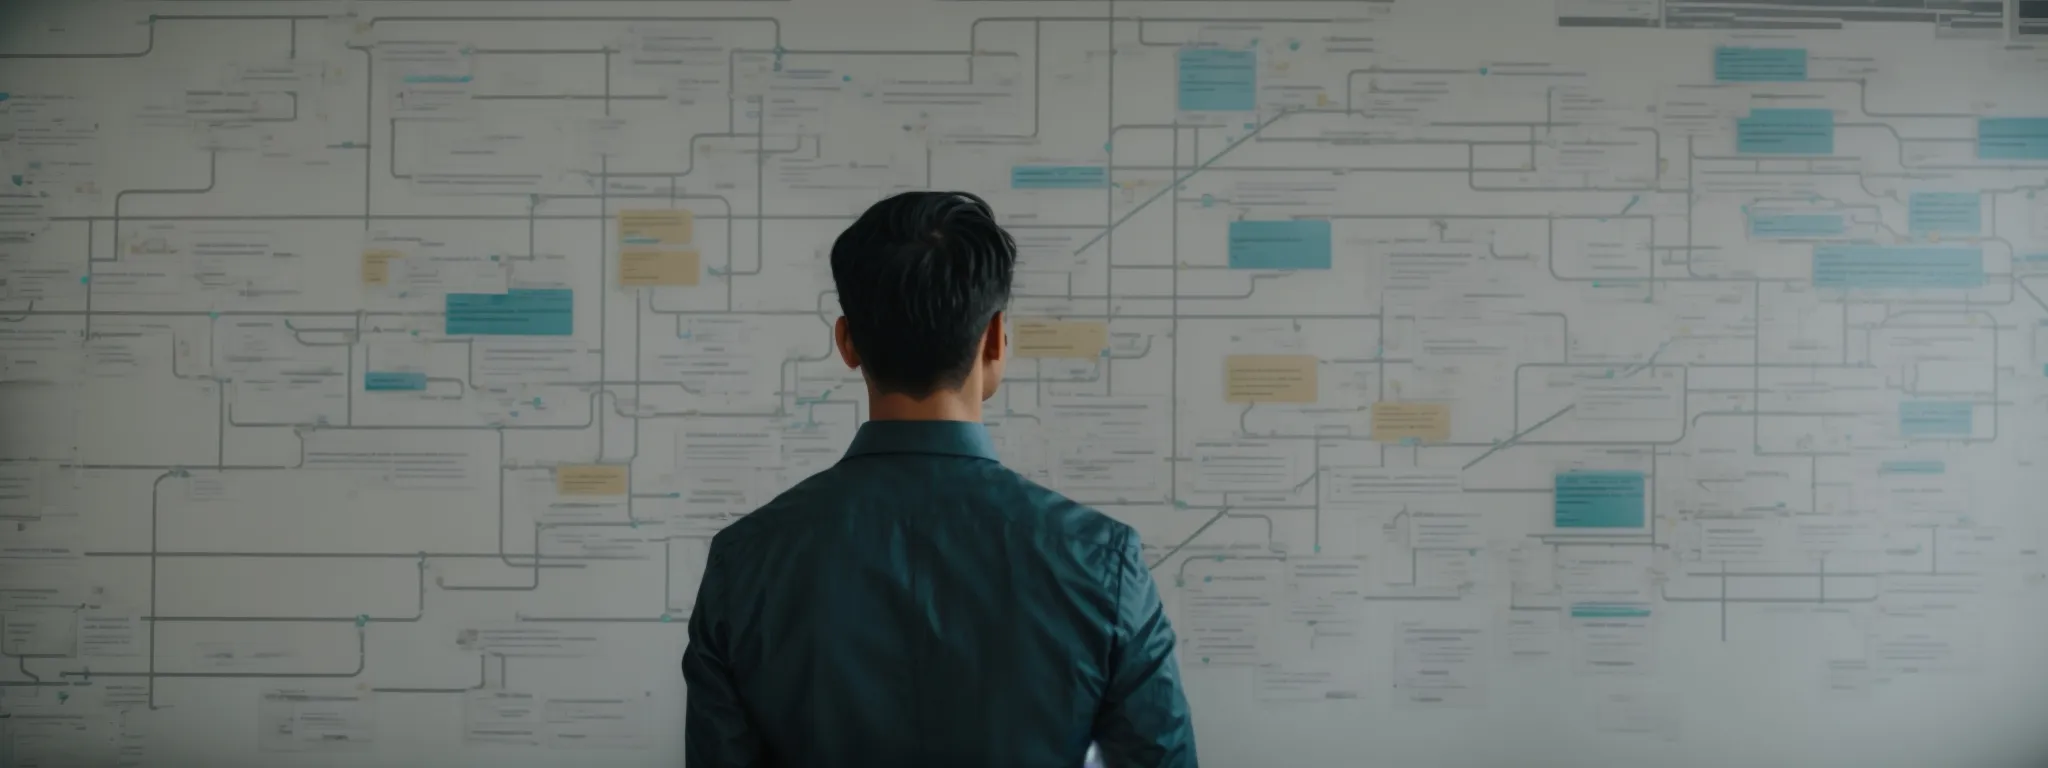 a person planning an seo strategy with a large visible flowchart on the wall that outlines a complex website structure.